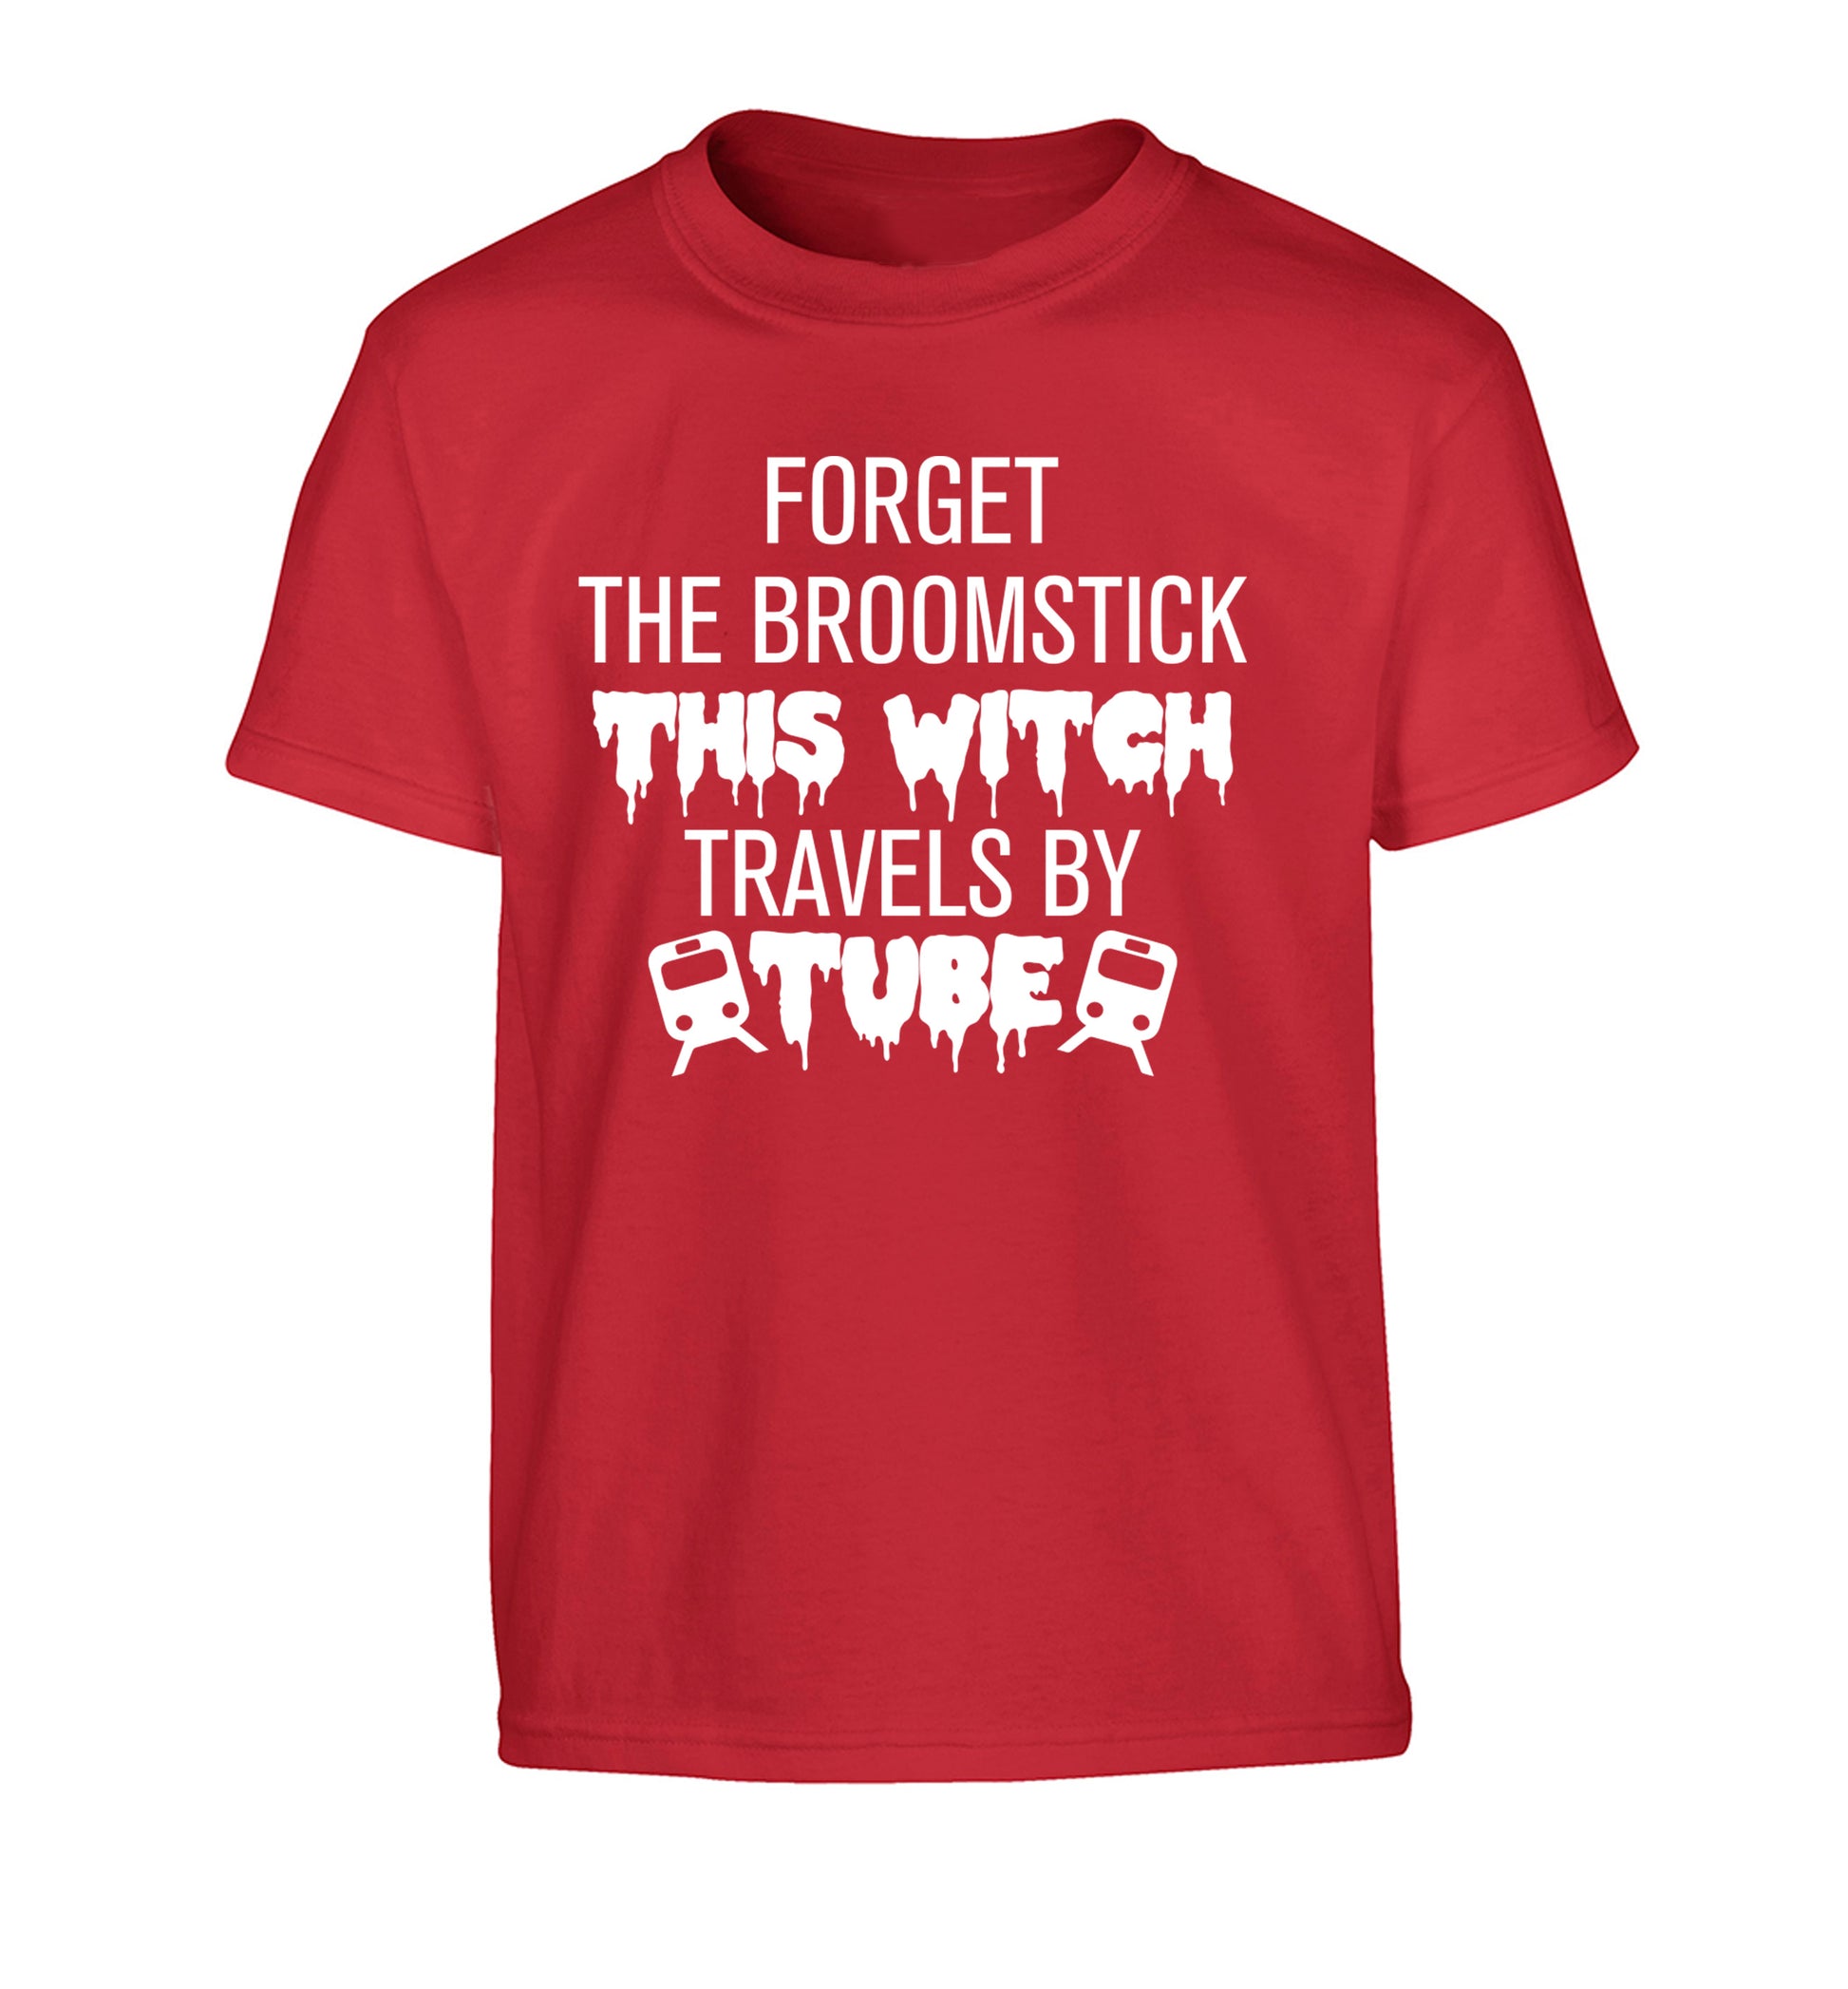 Forget the broomstick this witch travels by tube Children's red Tshirt 12-14 Years